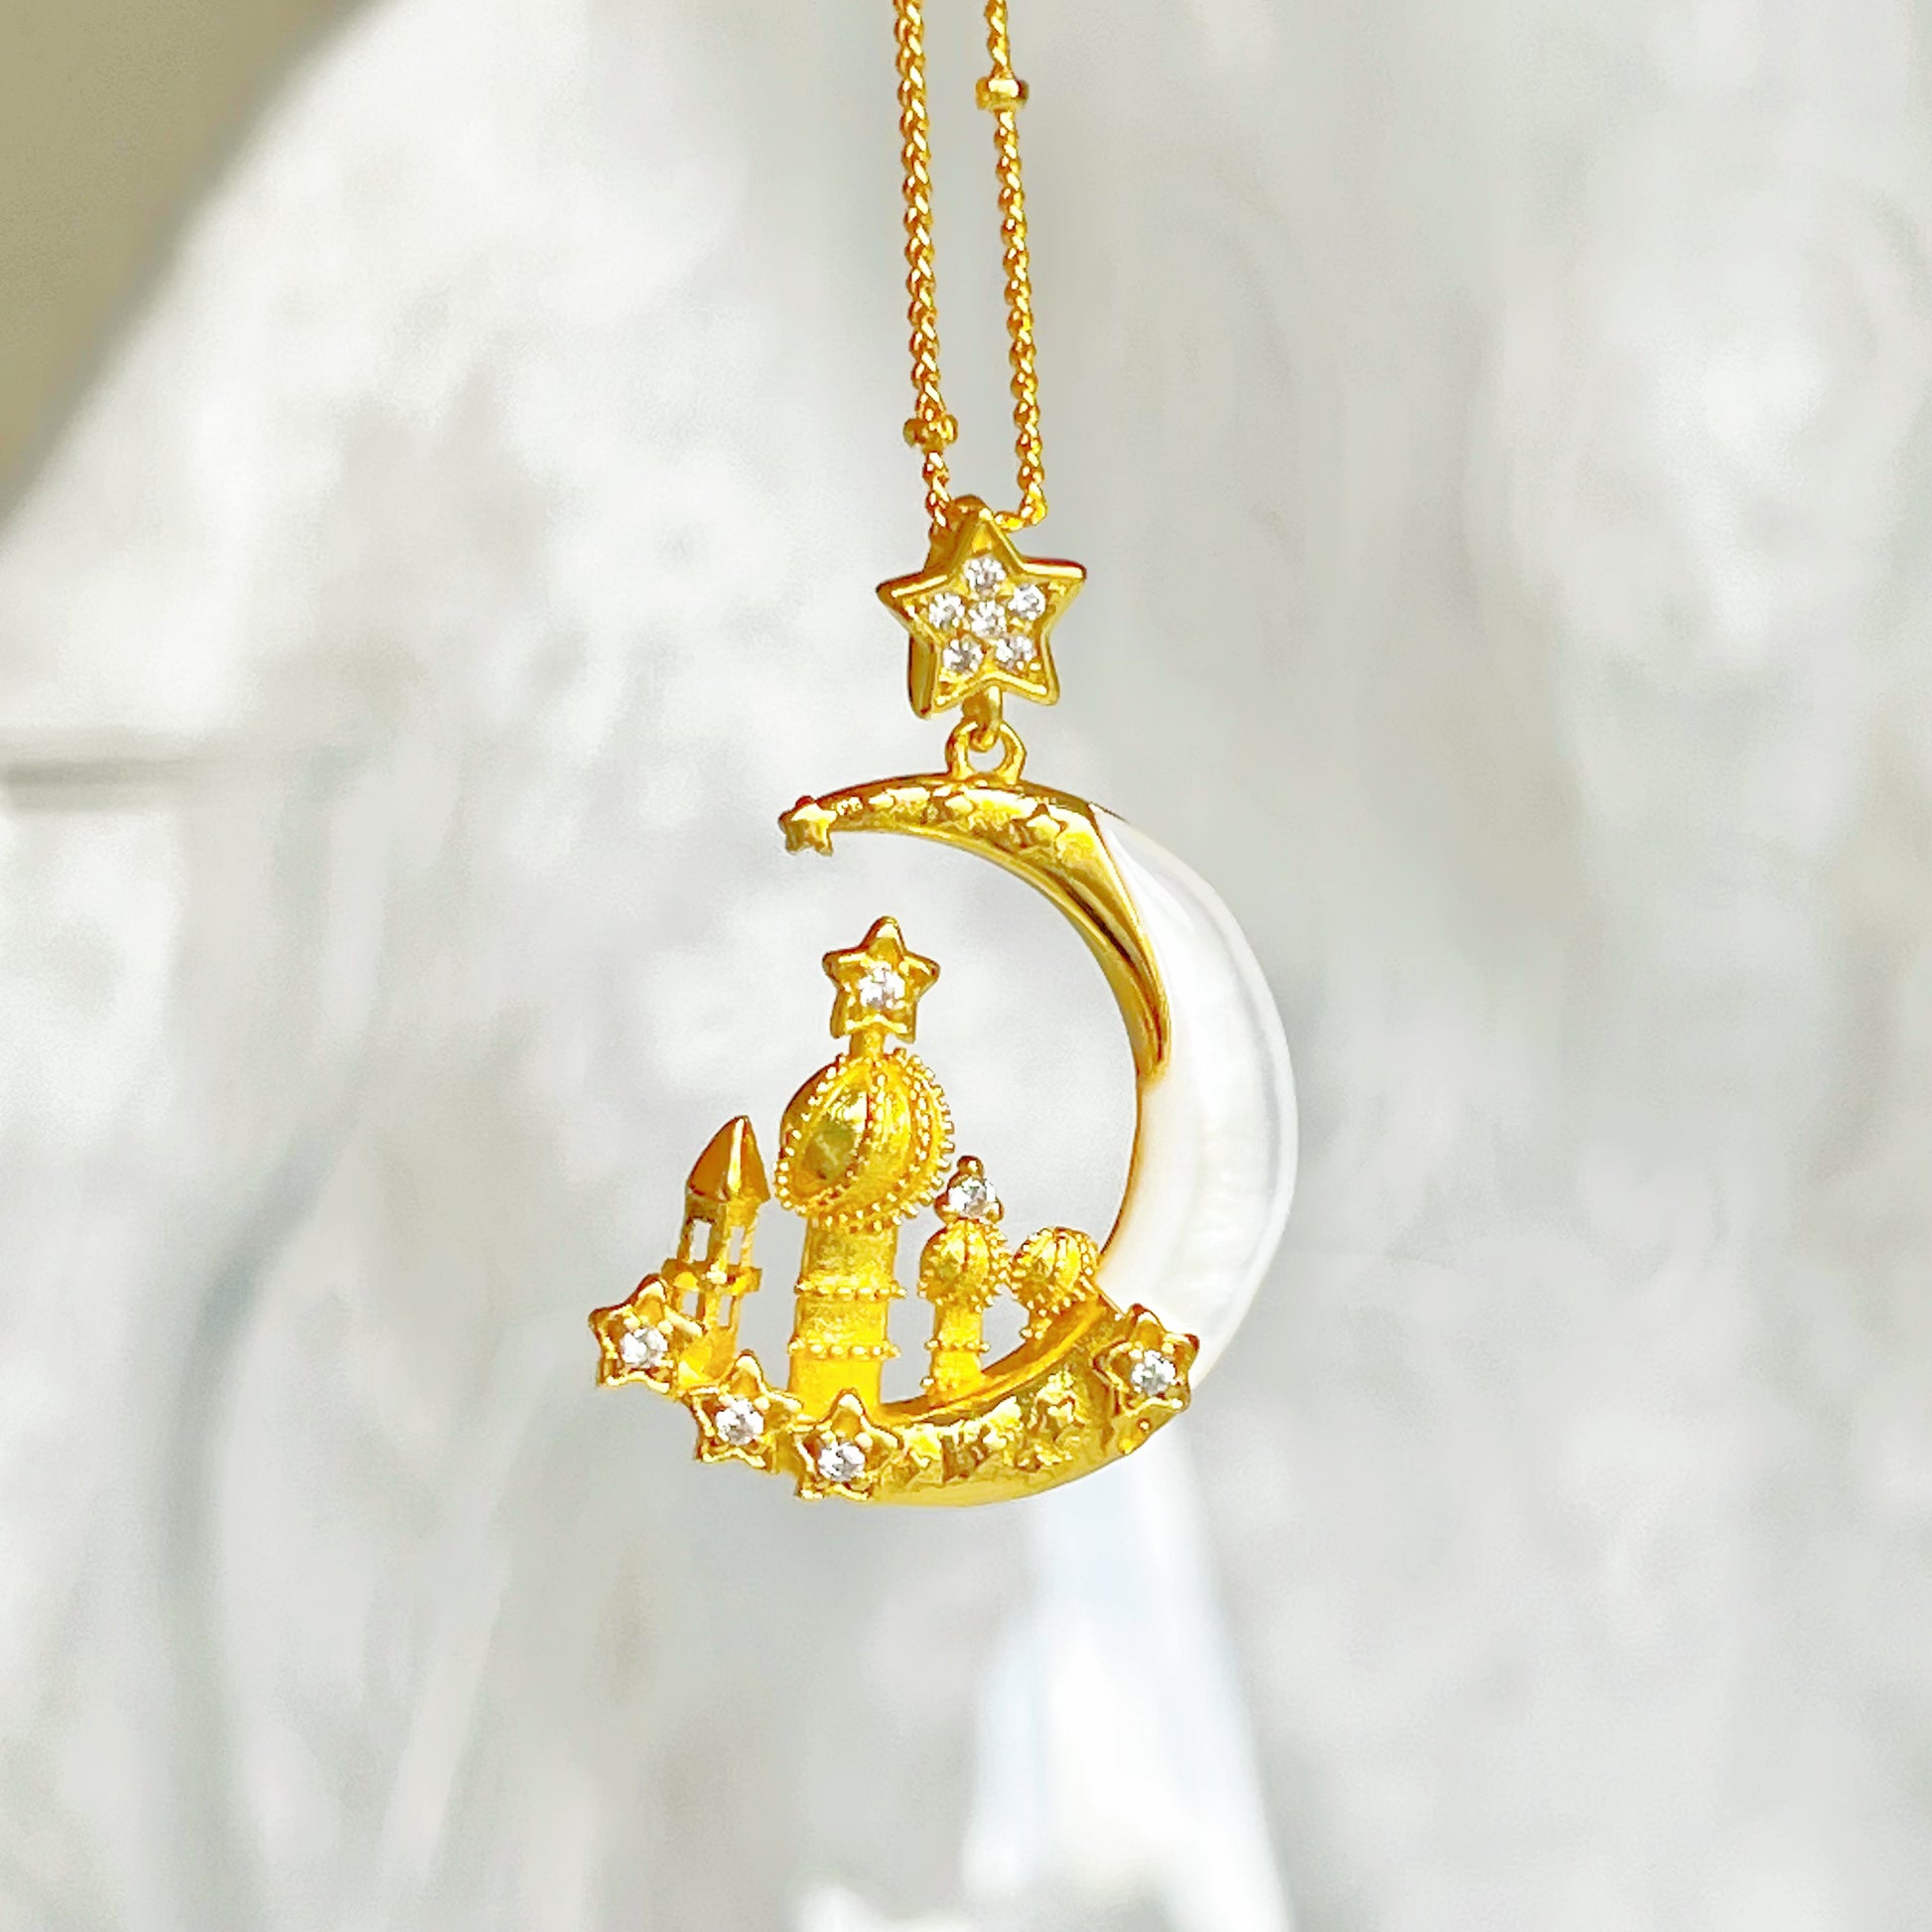 Palace on the Moon Charm Necklace-Ninaouity